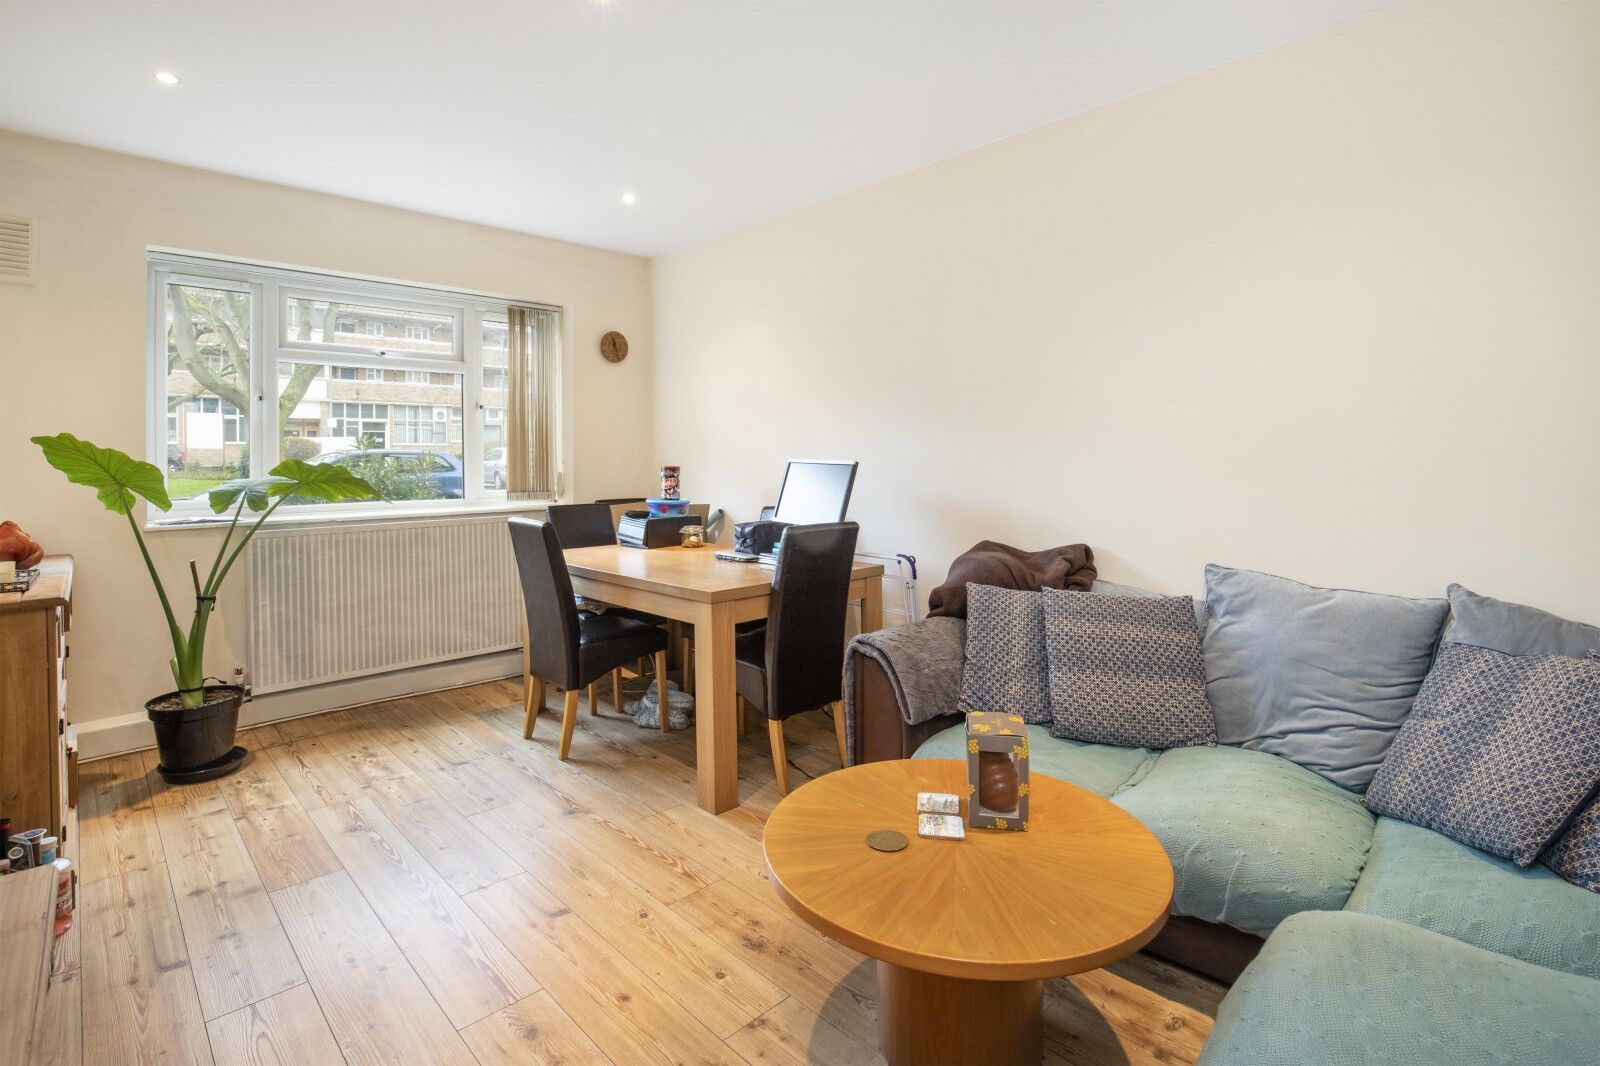 1 bedroom  flat to rent, Available now Lochinvar Street, Balham, SW12, main image